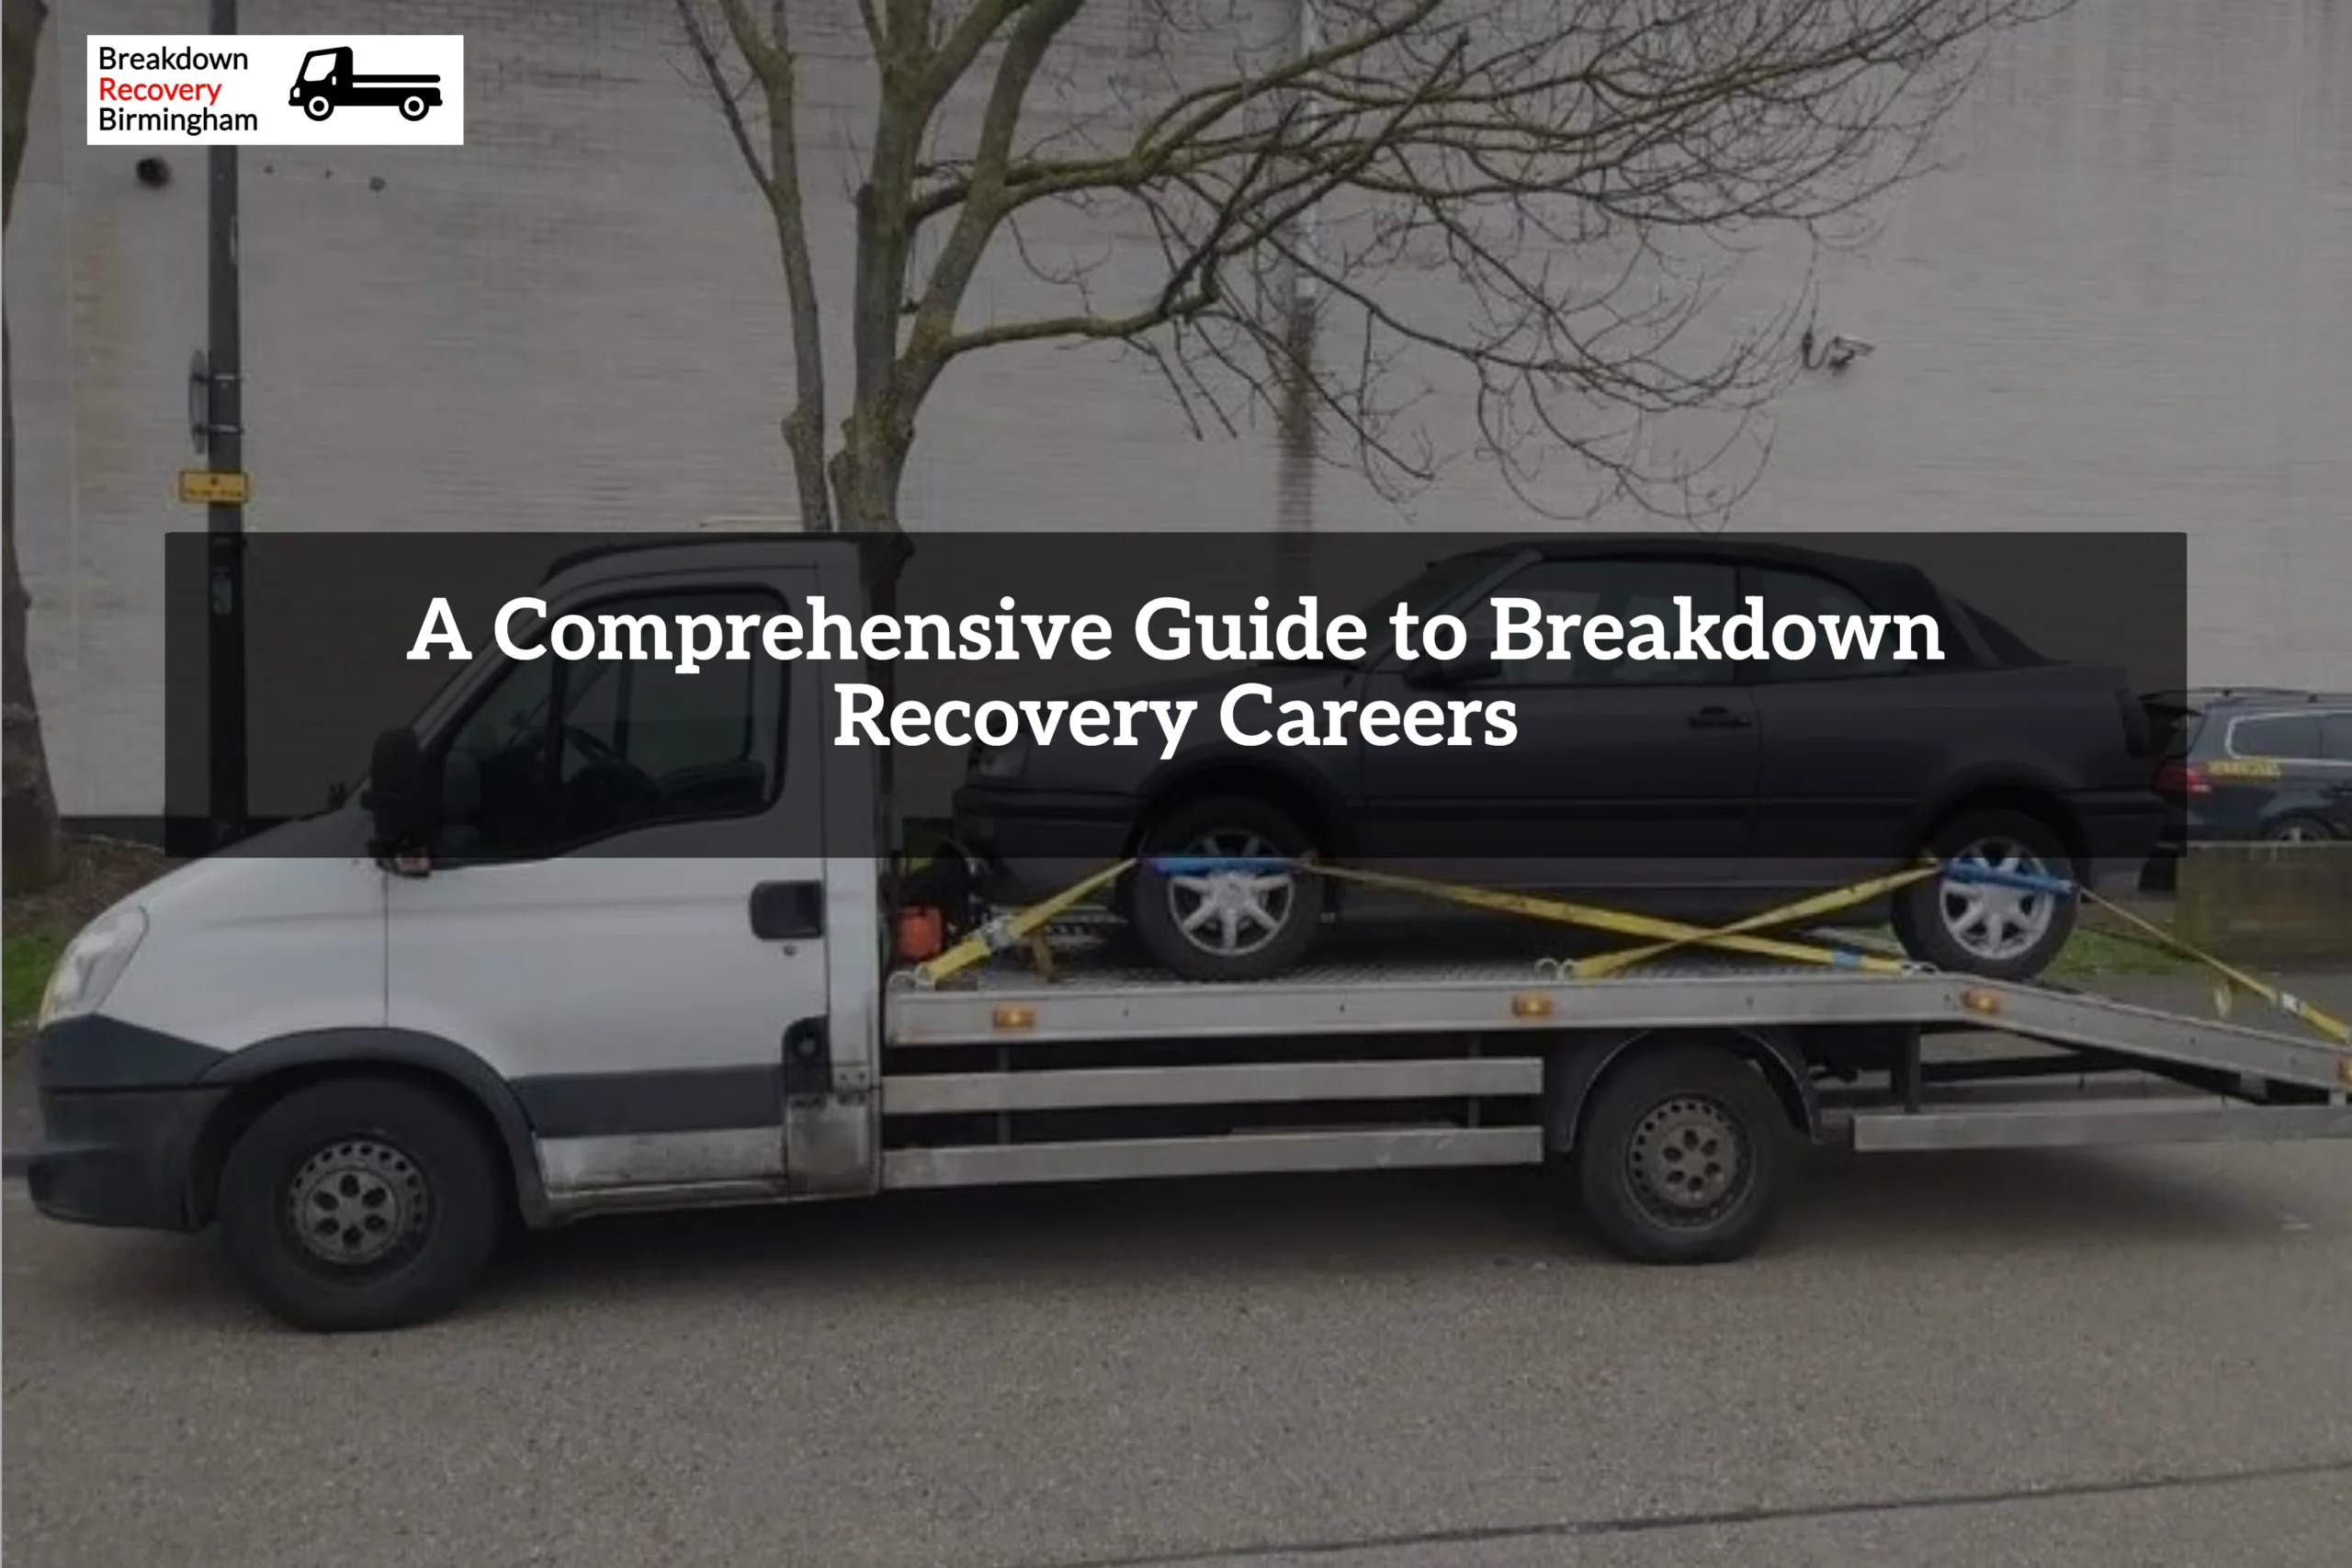 A Comprehensive Guide to Breakdown Recovery Careers